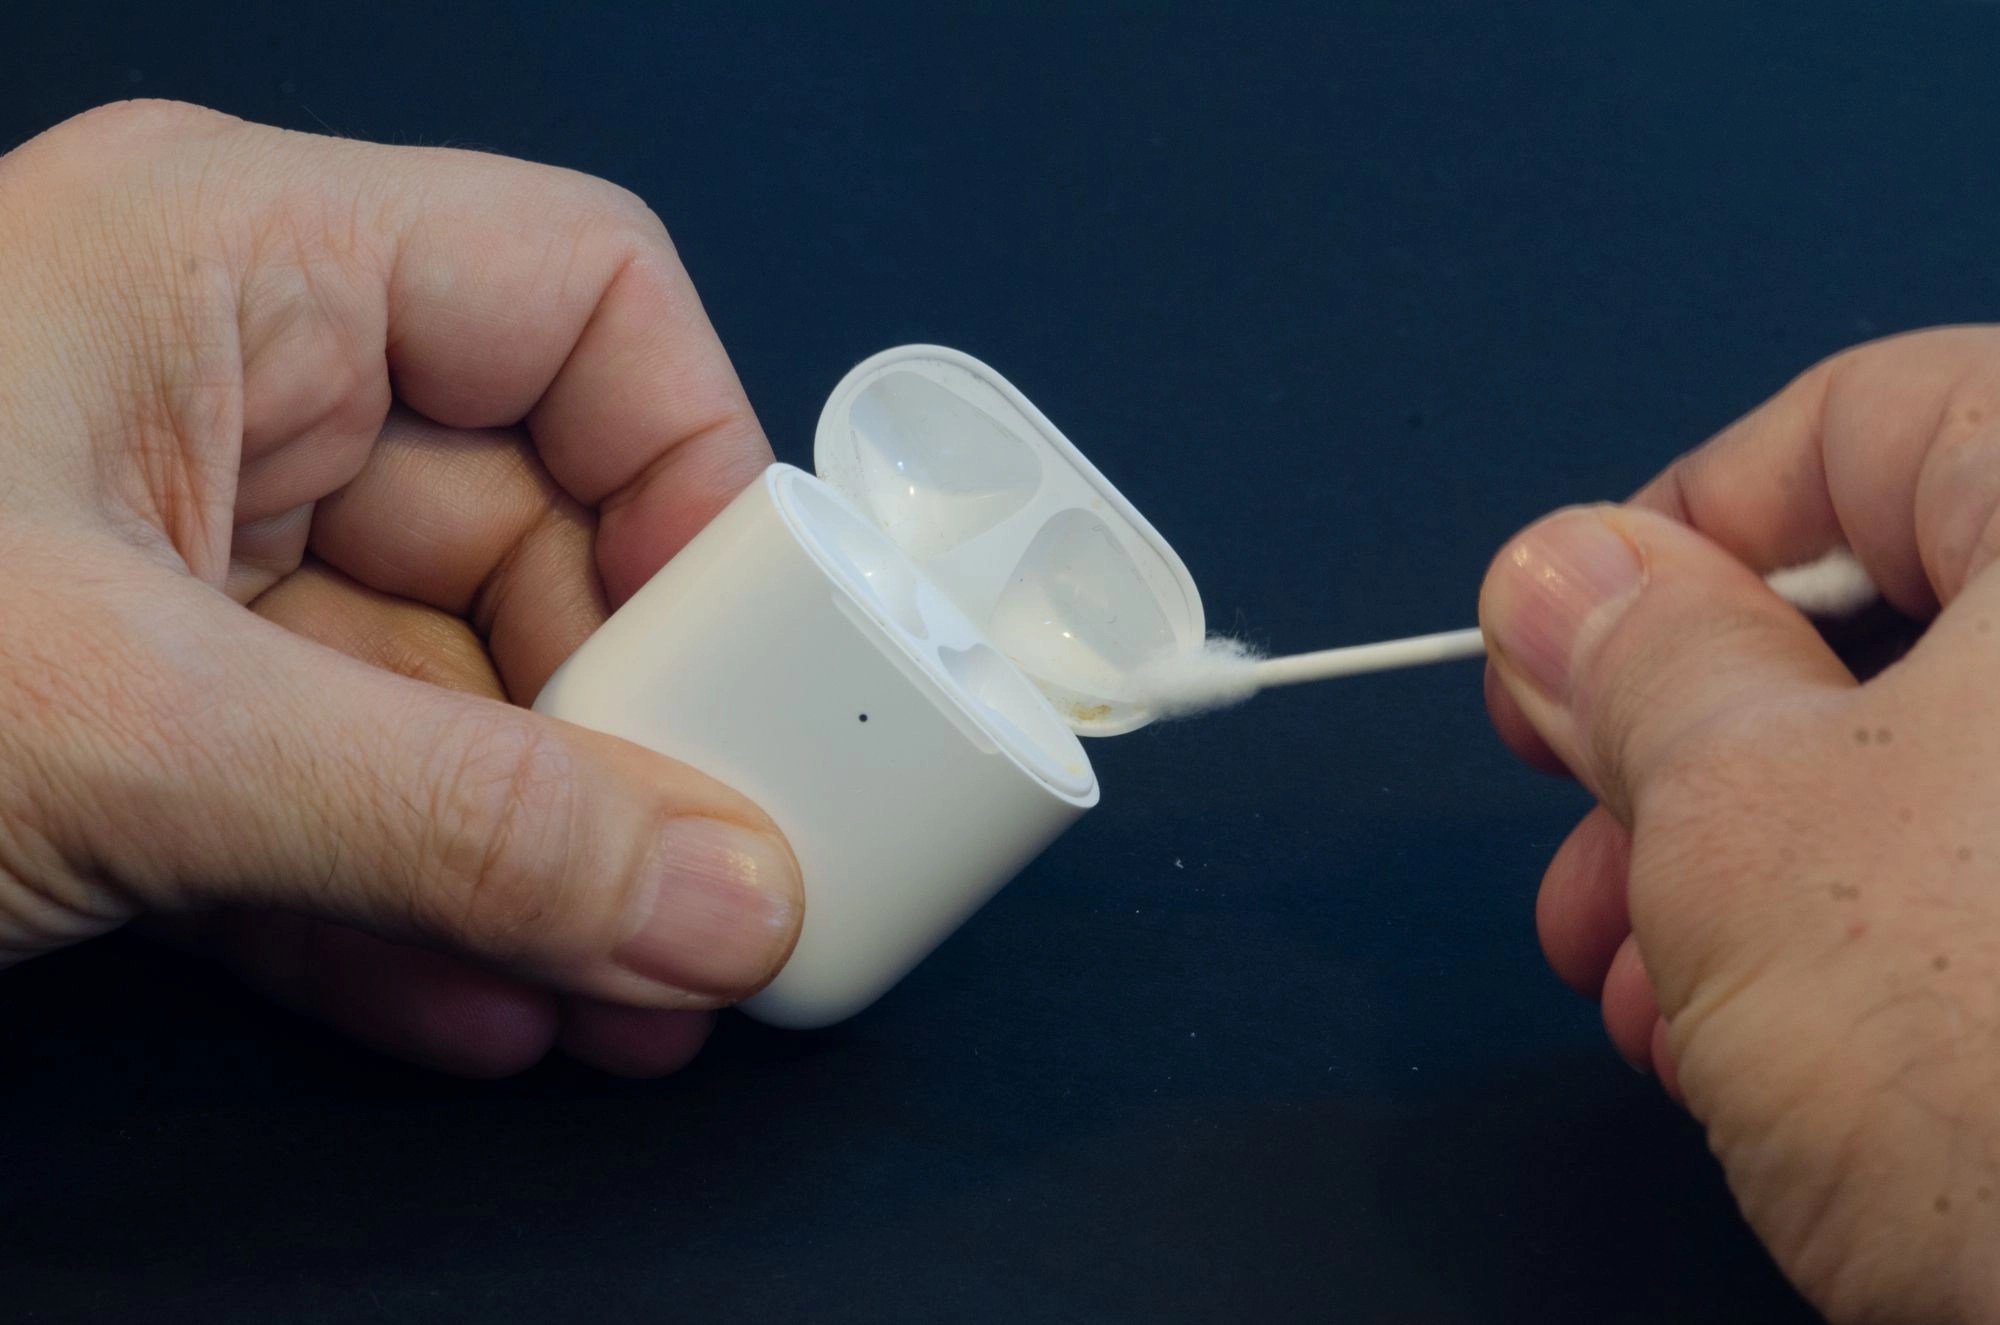 How To Clean Your AirPods And Their Case